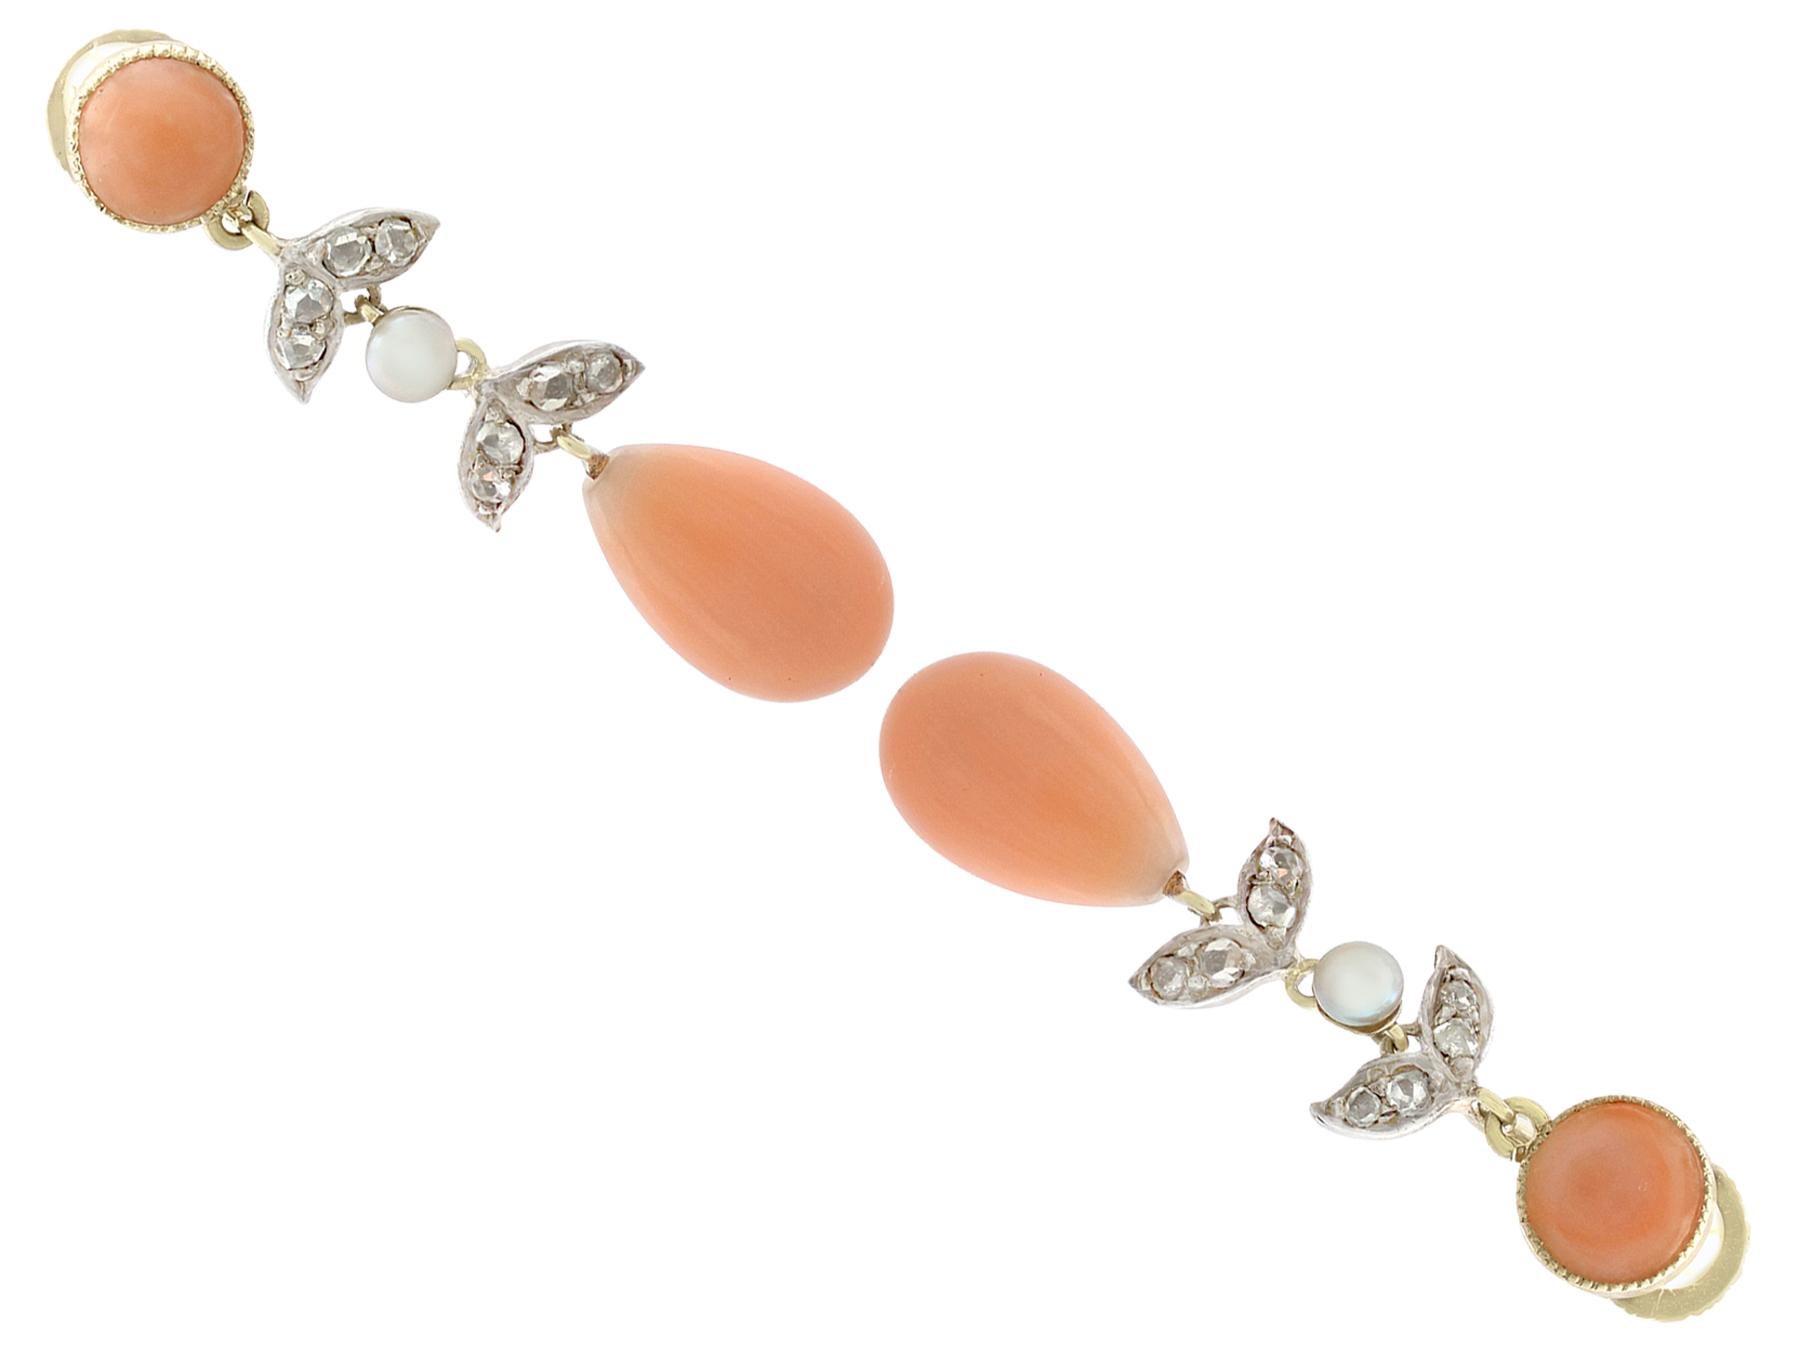 A stunning pair of antique pink coral and seed pearl, 0.33 carat diamond and 15 carat yellow gold, silver set drop earrings; part of our diverse antique jewellery and estate jewelry collections.

These stunning, fine and impressive pink coral drop